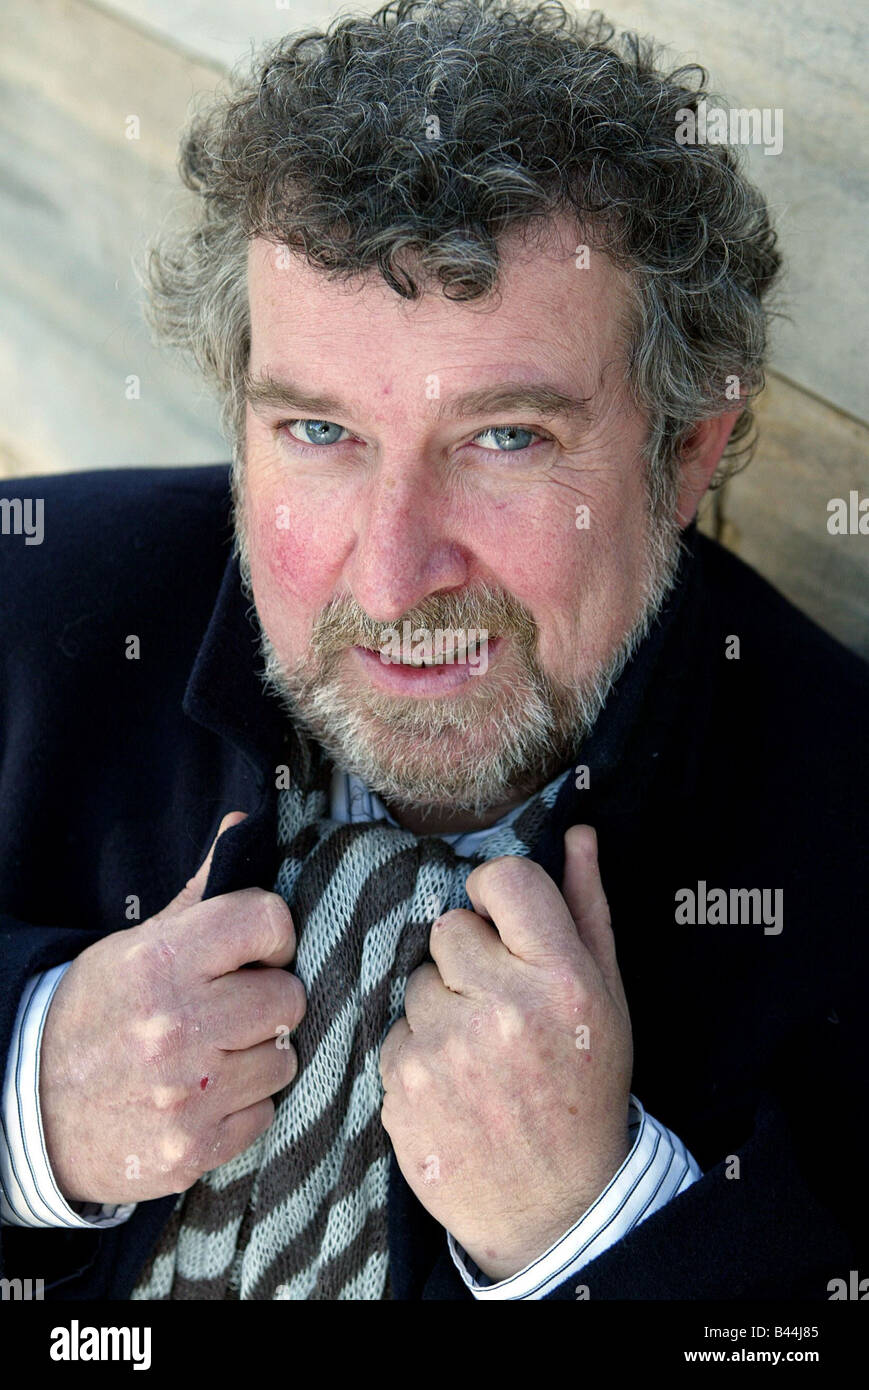 Actor Paul Bradley who is presently appearing in the BBC medical drama Holby City November 2006 Stock Photo